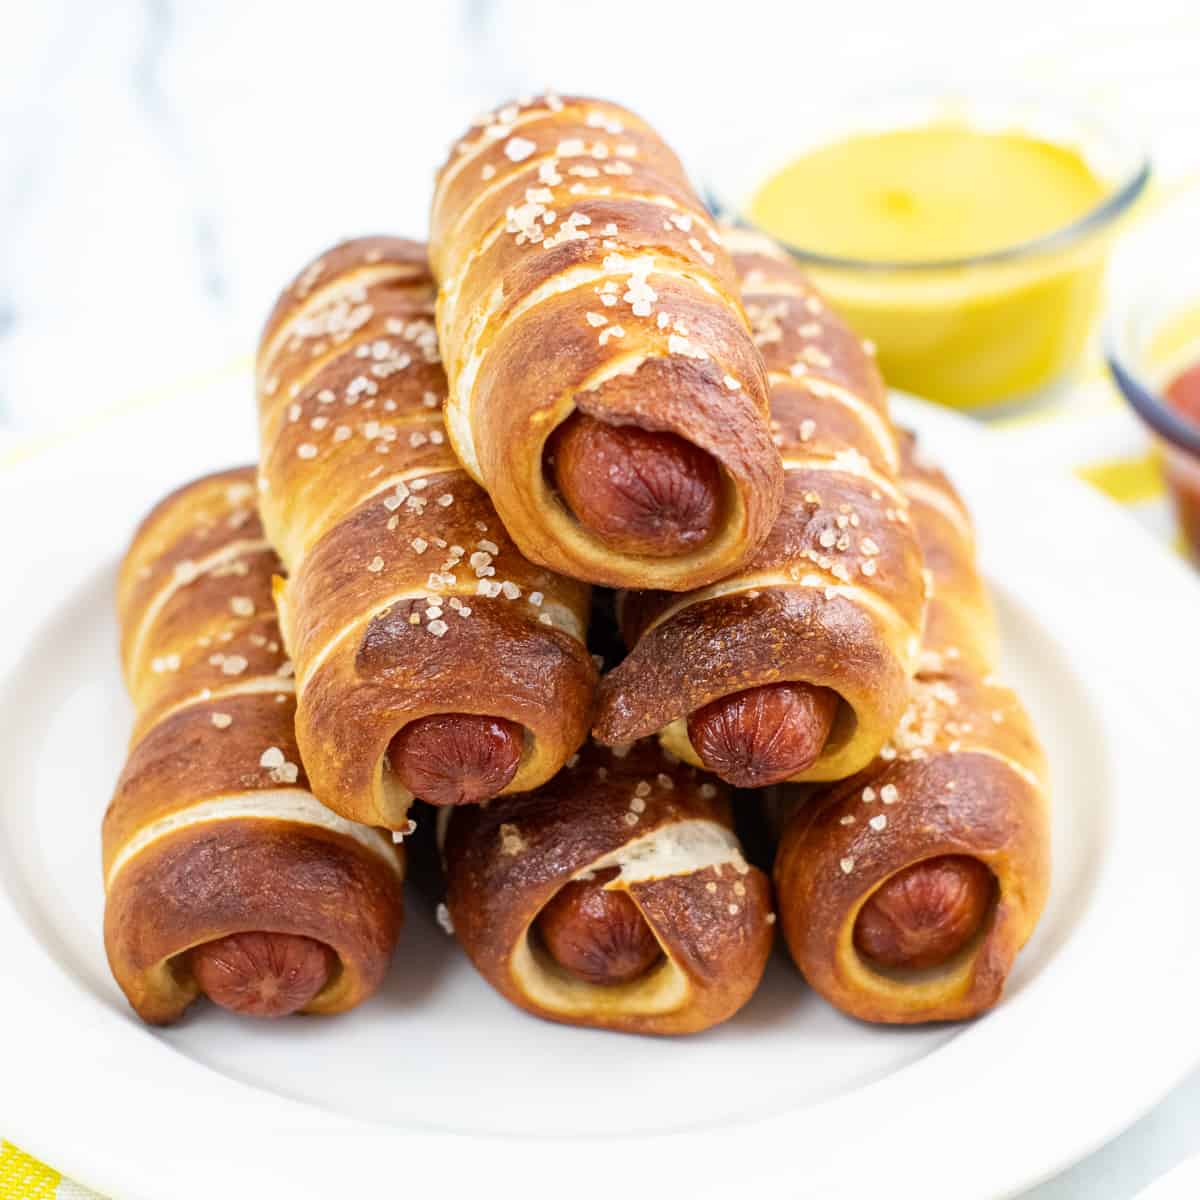 pretzel wrapped hot dogs stacked in a pyramid shape on white plate with bowl of mustard in the background.